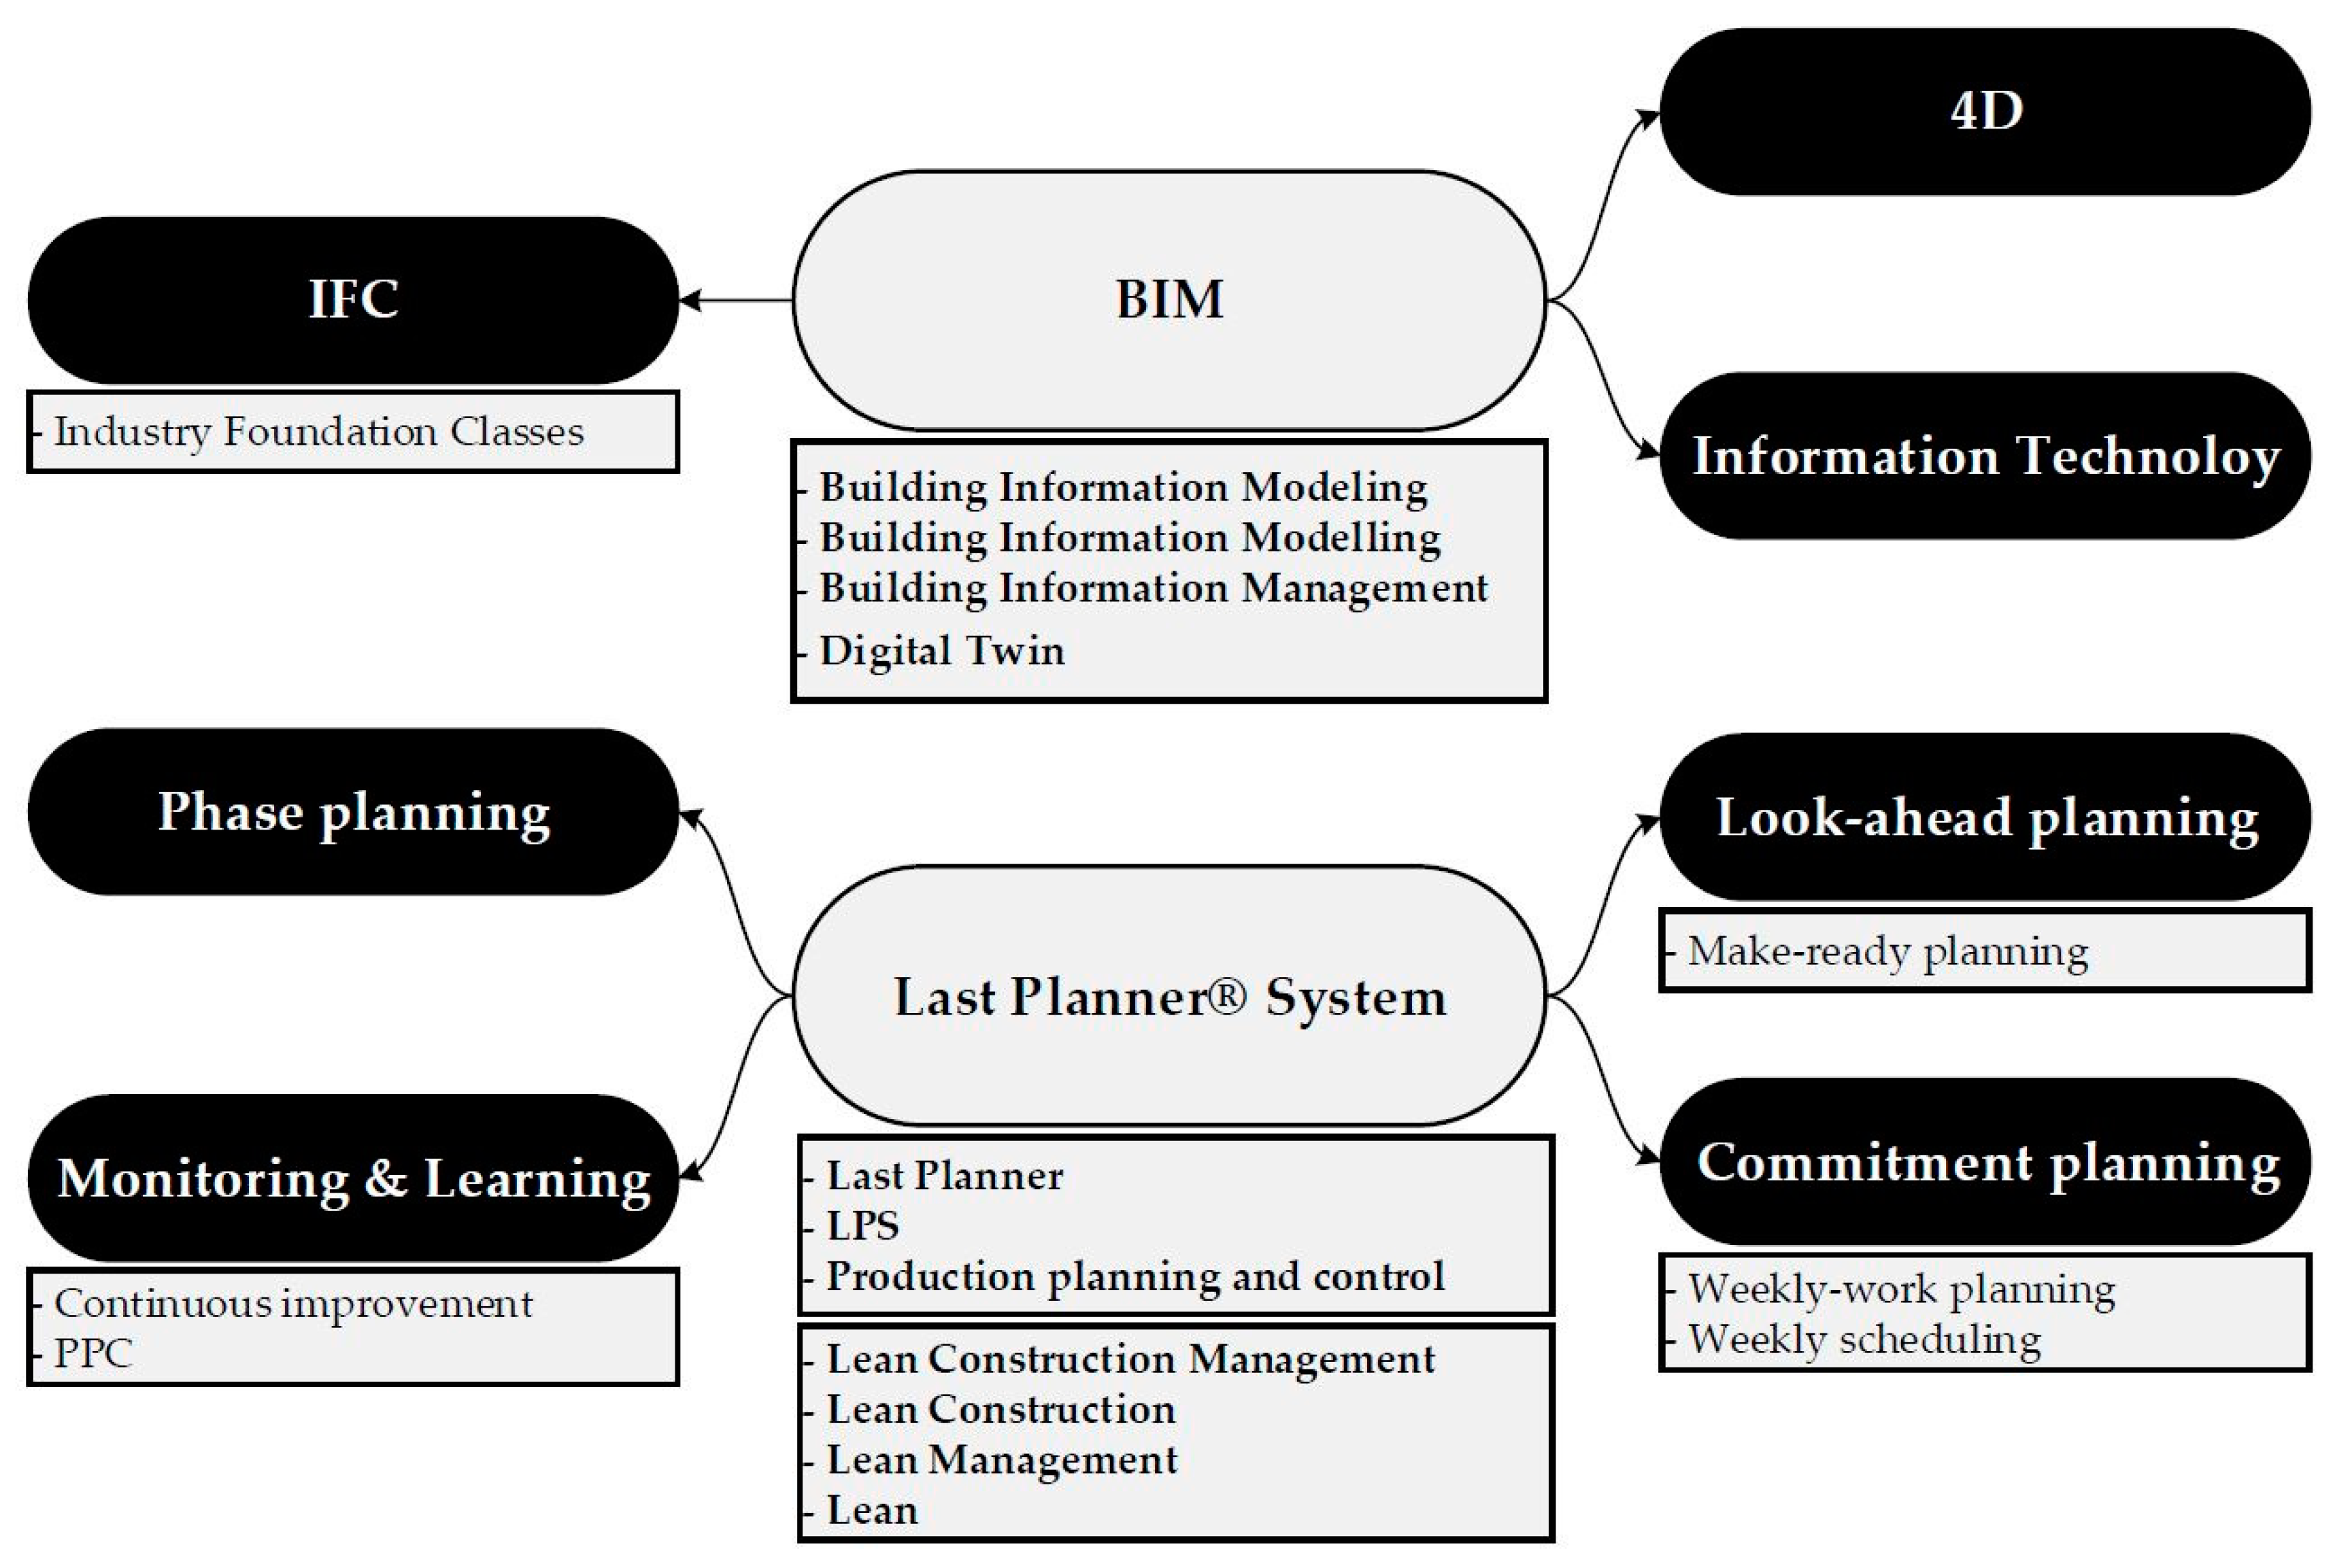 Applied Sciences | Free Full-Text | The Last Planner® System and Building  Information Modeling in Construction Execution: From an Integrative Review  to a Conceptual Model for Integration | HTML